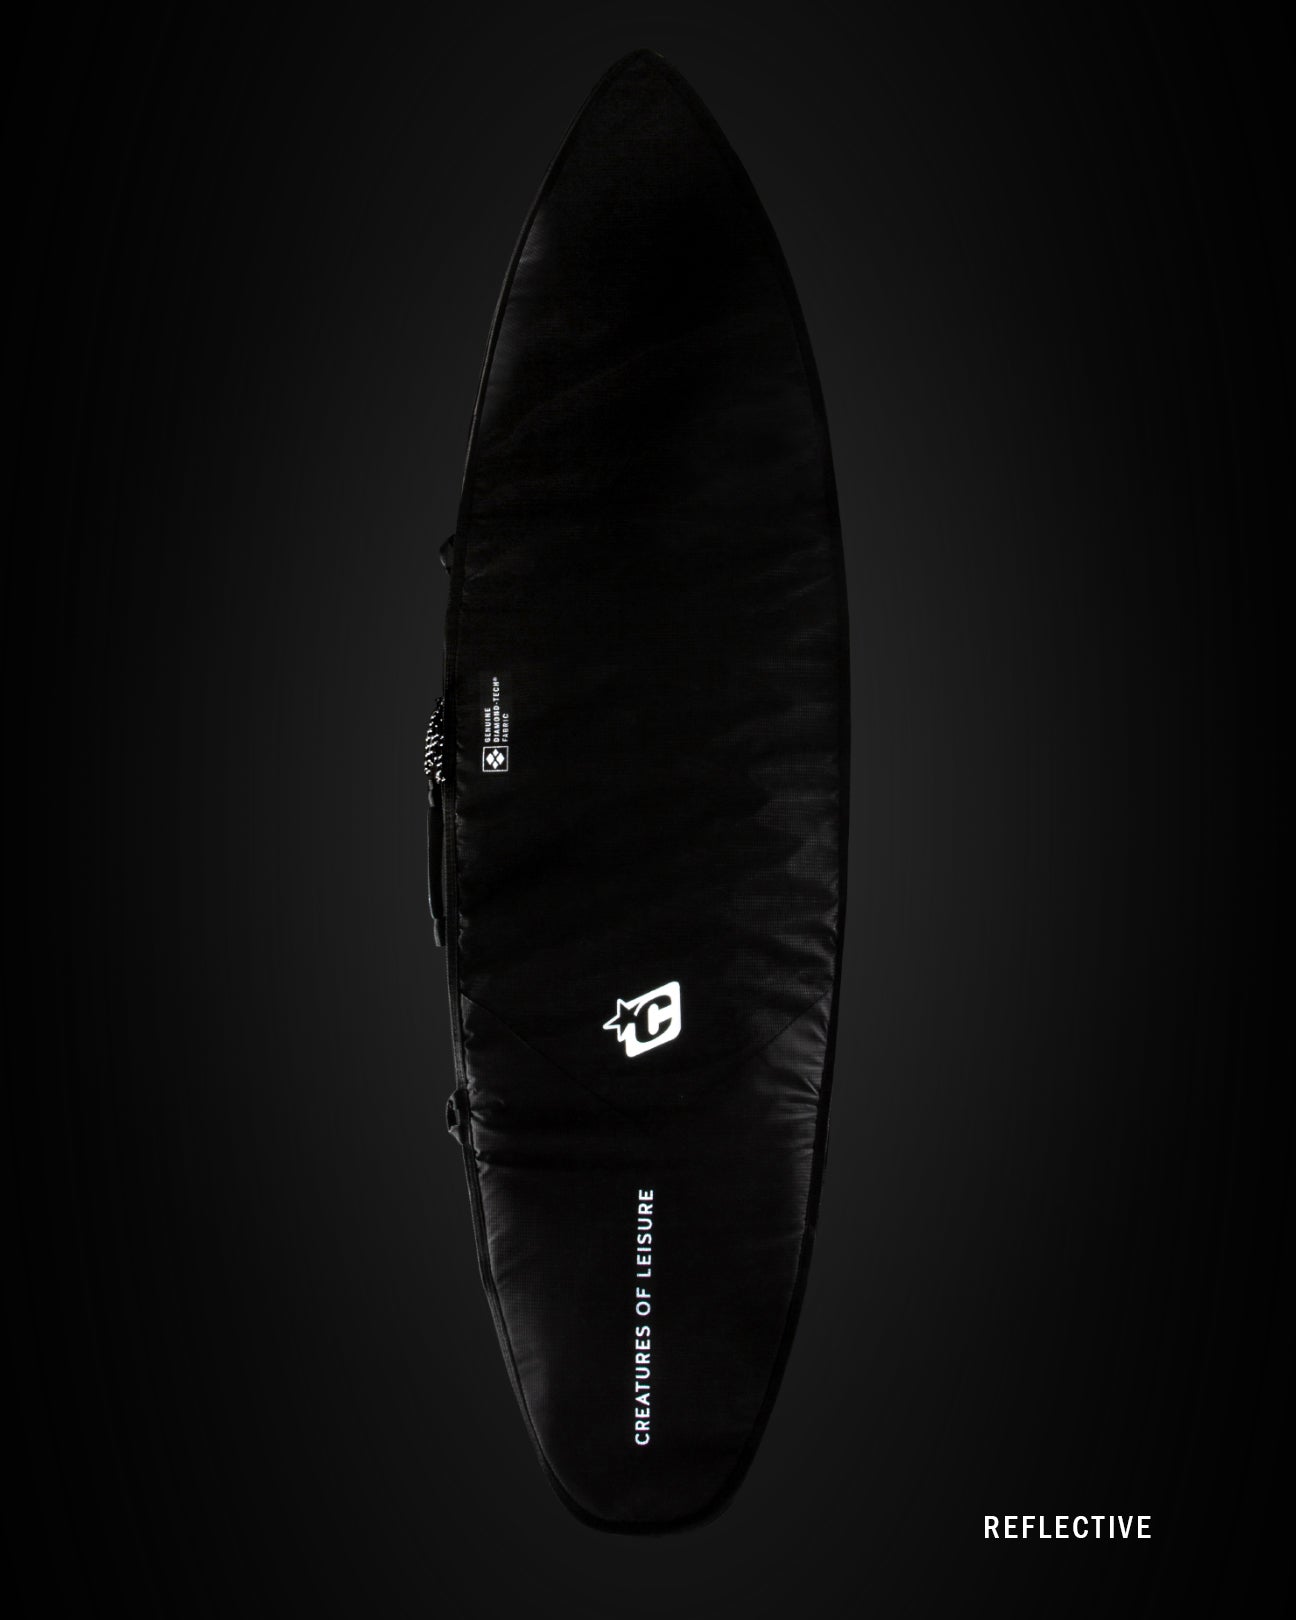 Creatures Shortboard Day Use DT2.0 : Black